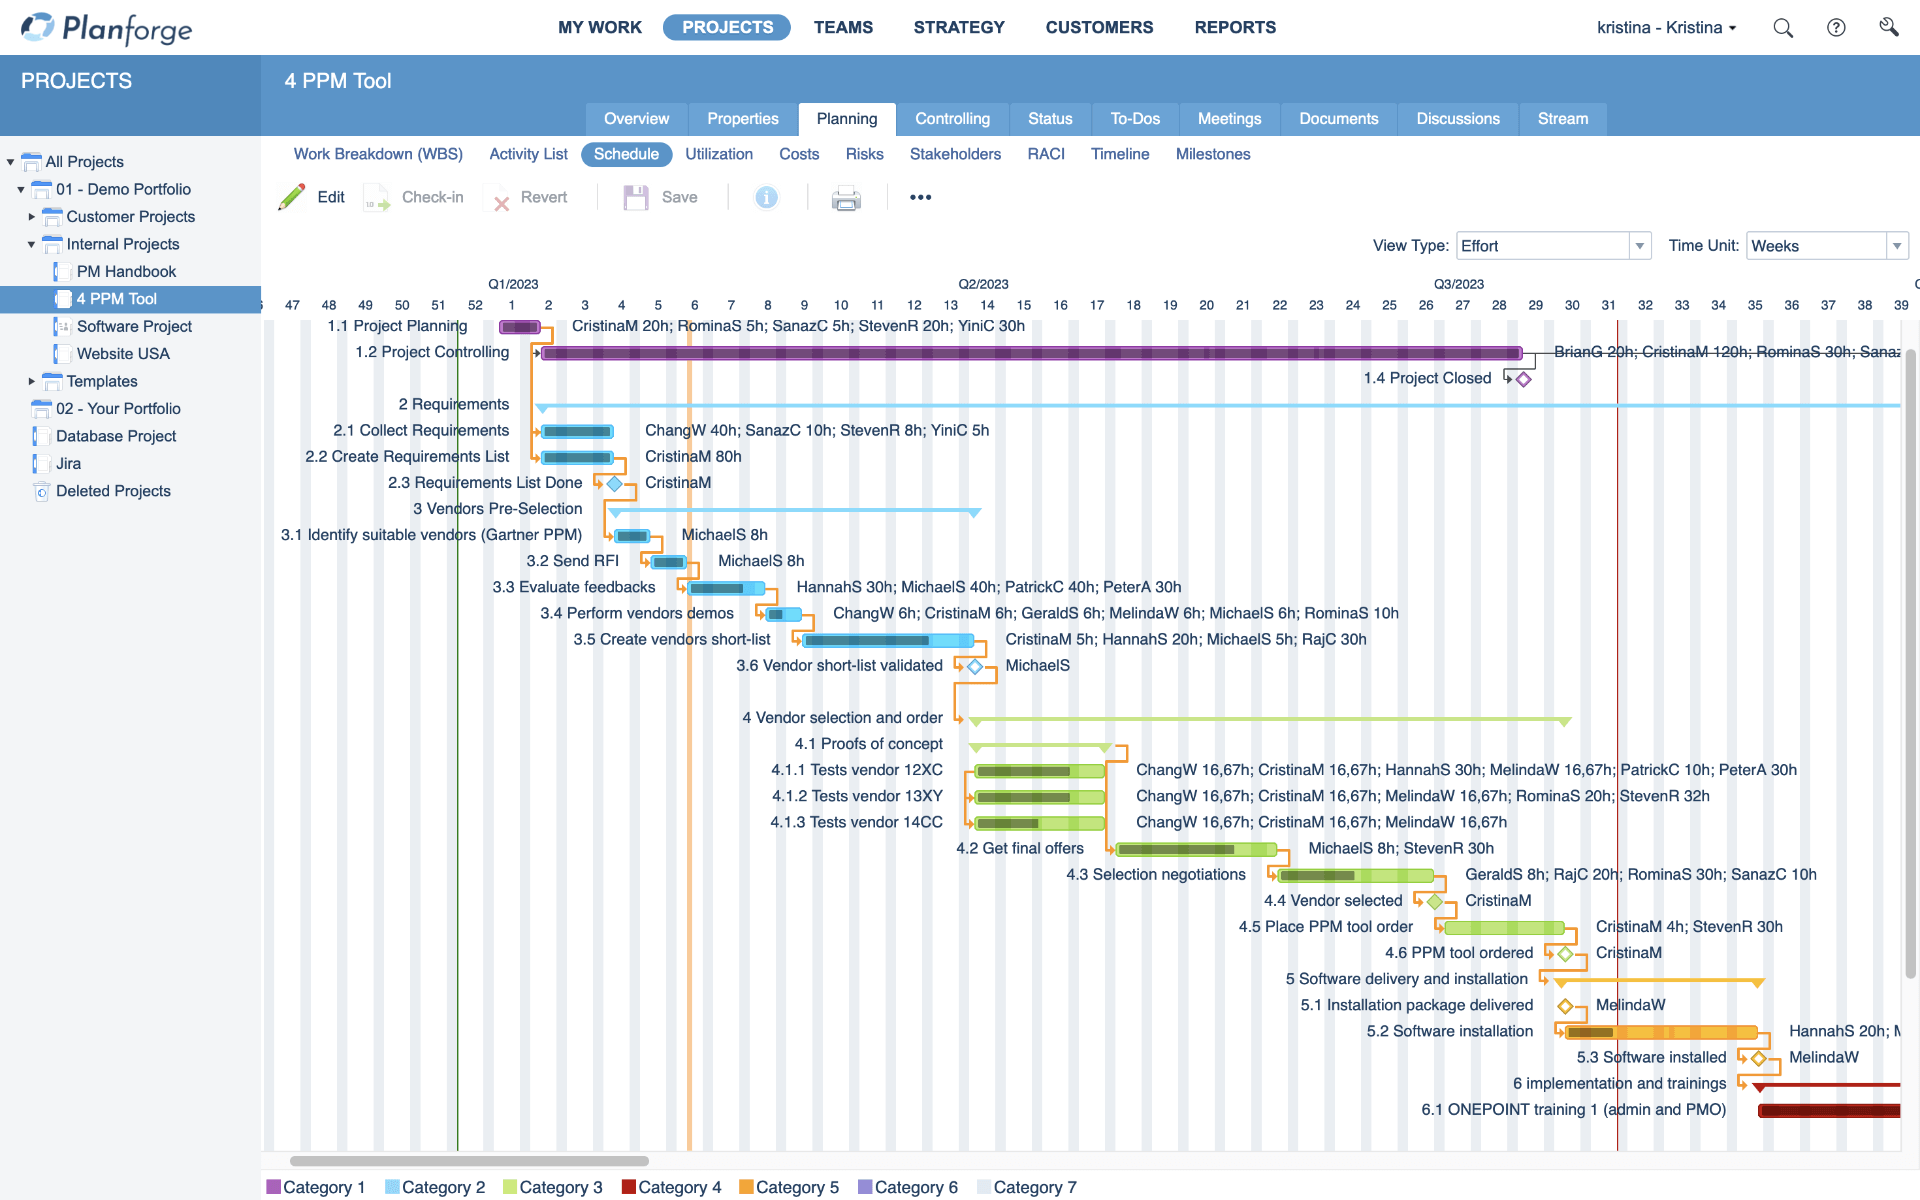 Planforge Software - Gantt chart: Fully editable, as well as drag & drop enabled. Create dependencies and stay on top of things with customizable category colors